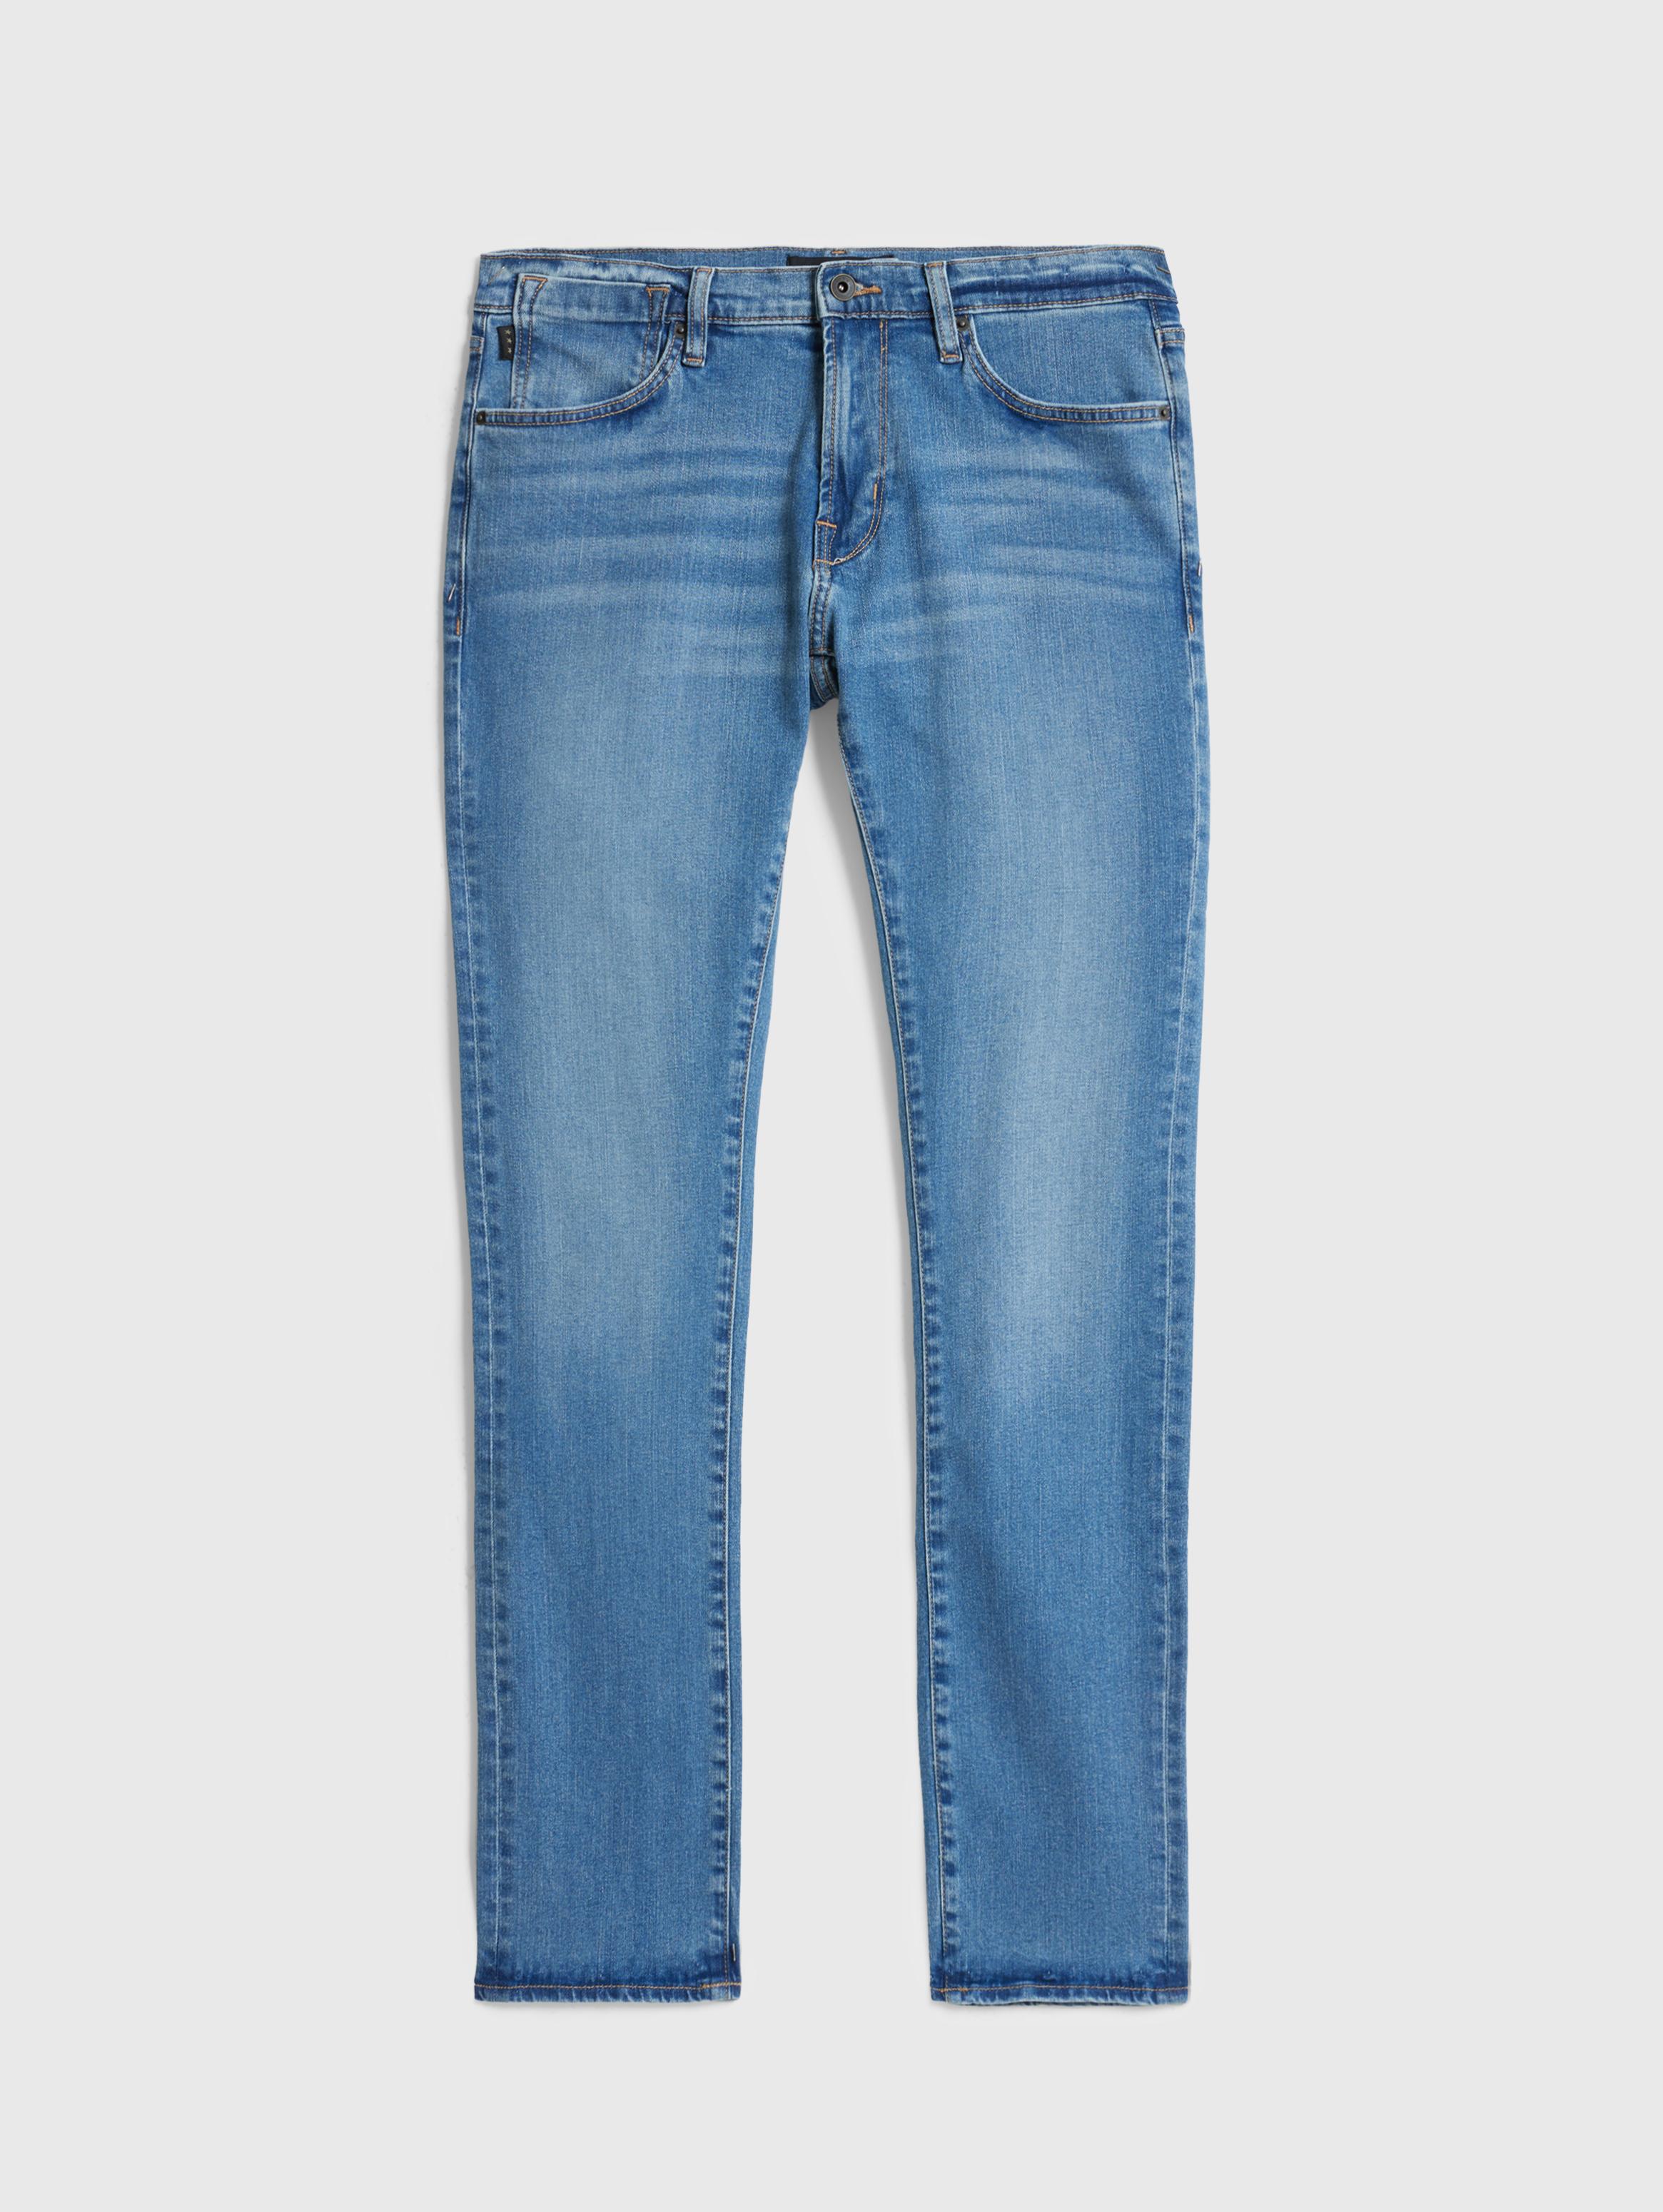 BOWERY JEANS